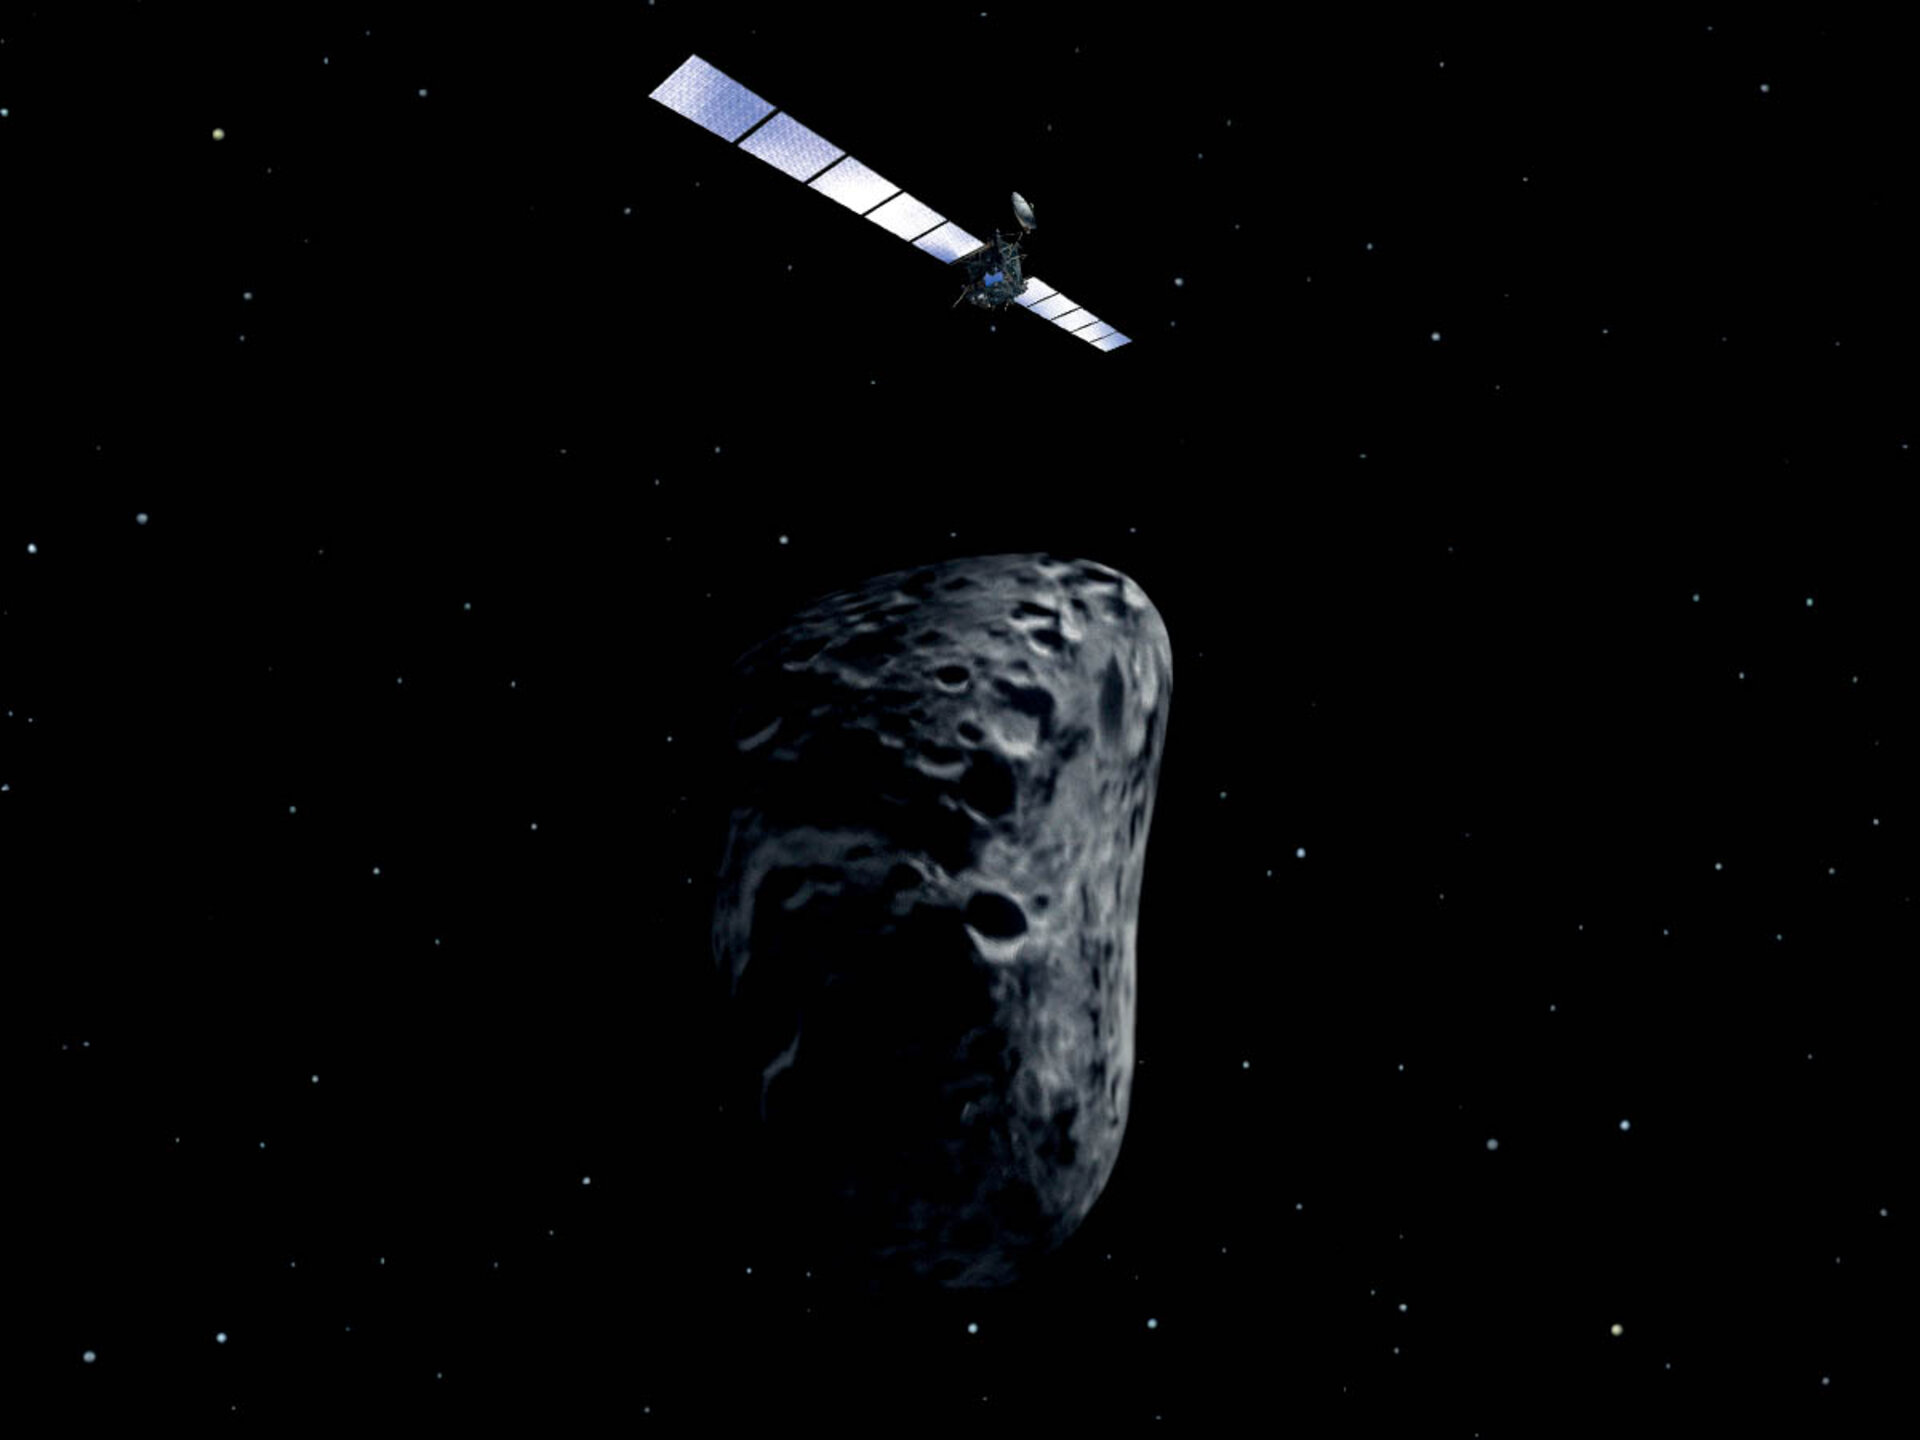 Otawara Flyby - The spacecraft goes into passive cruise mode on the way to asteroid Otawara